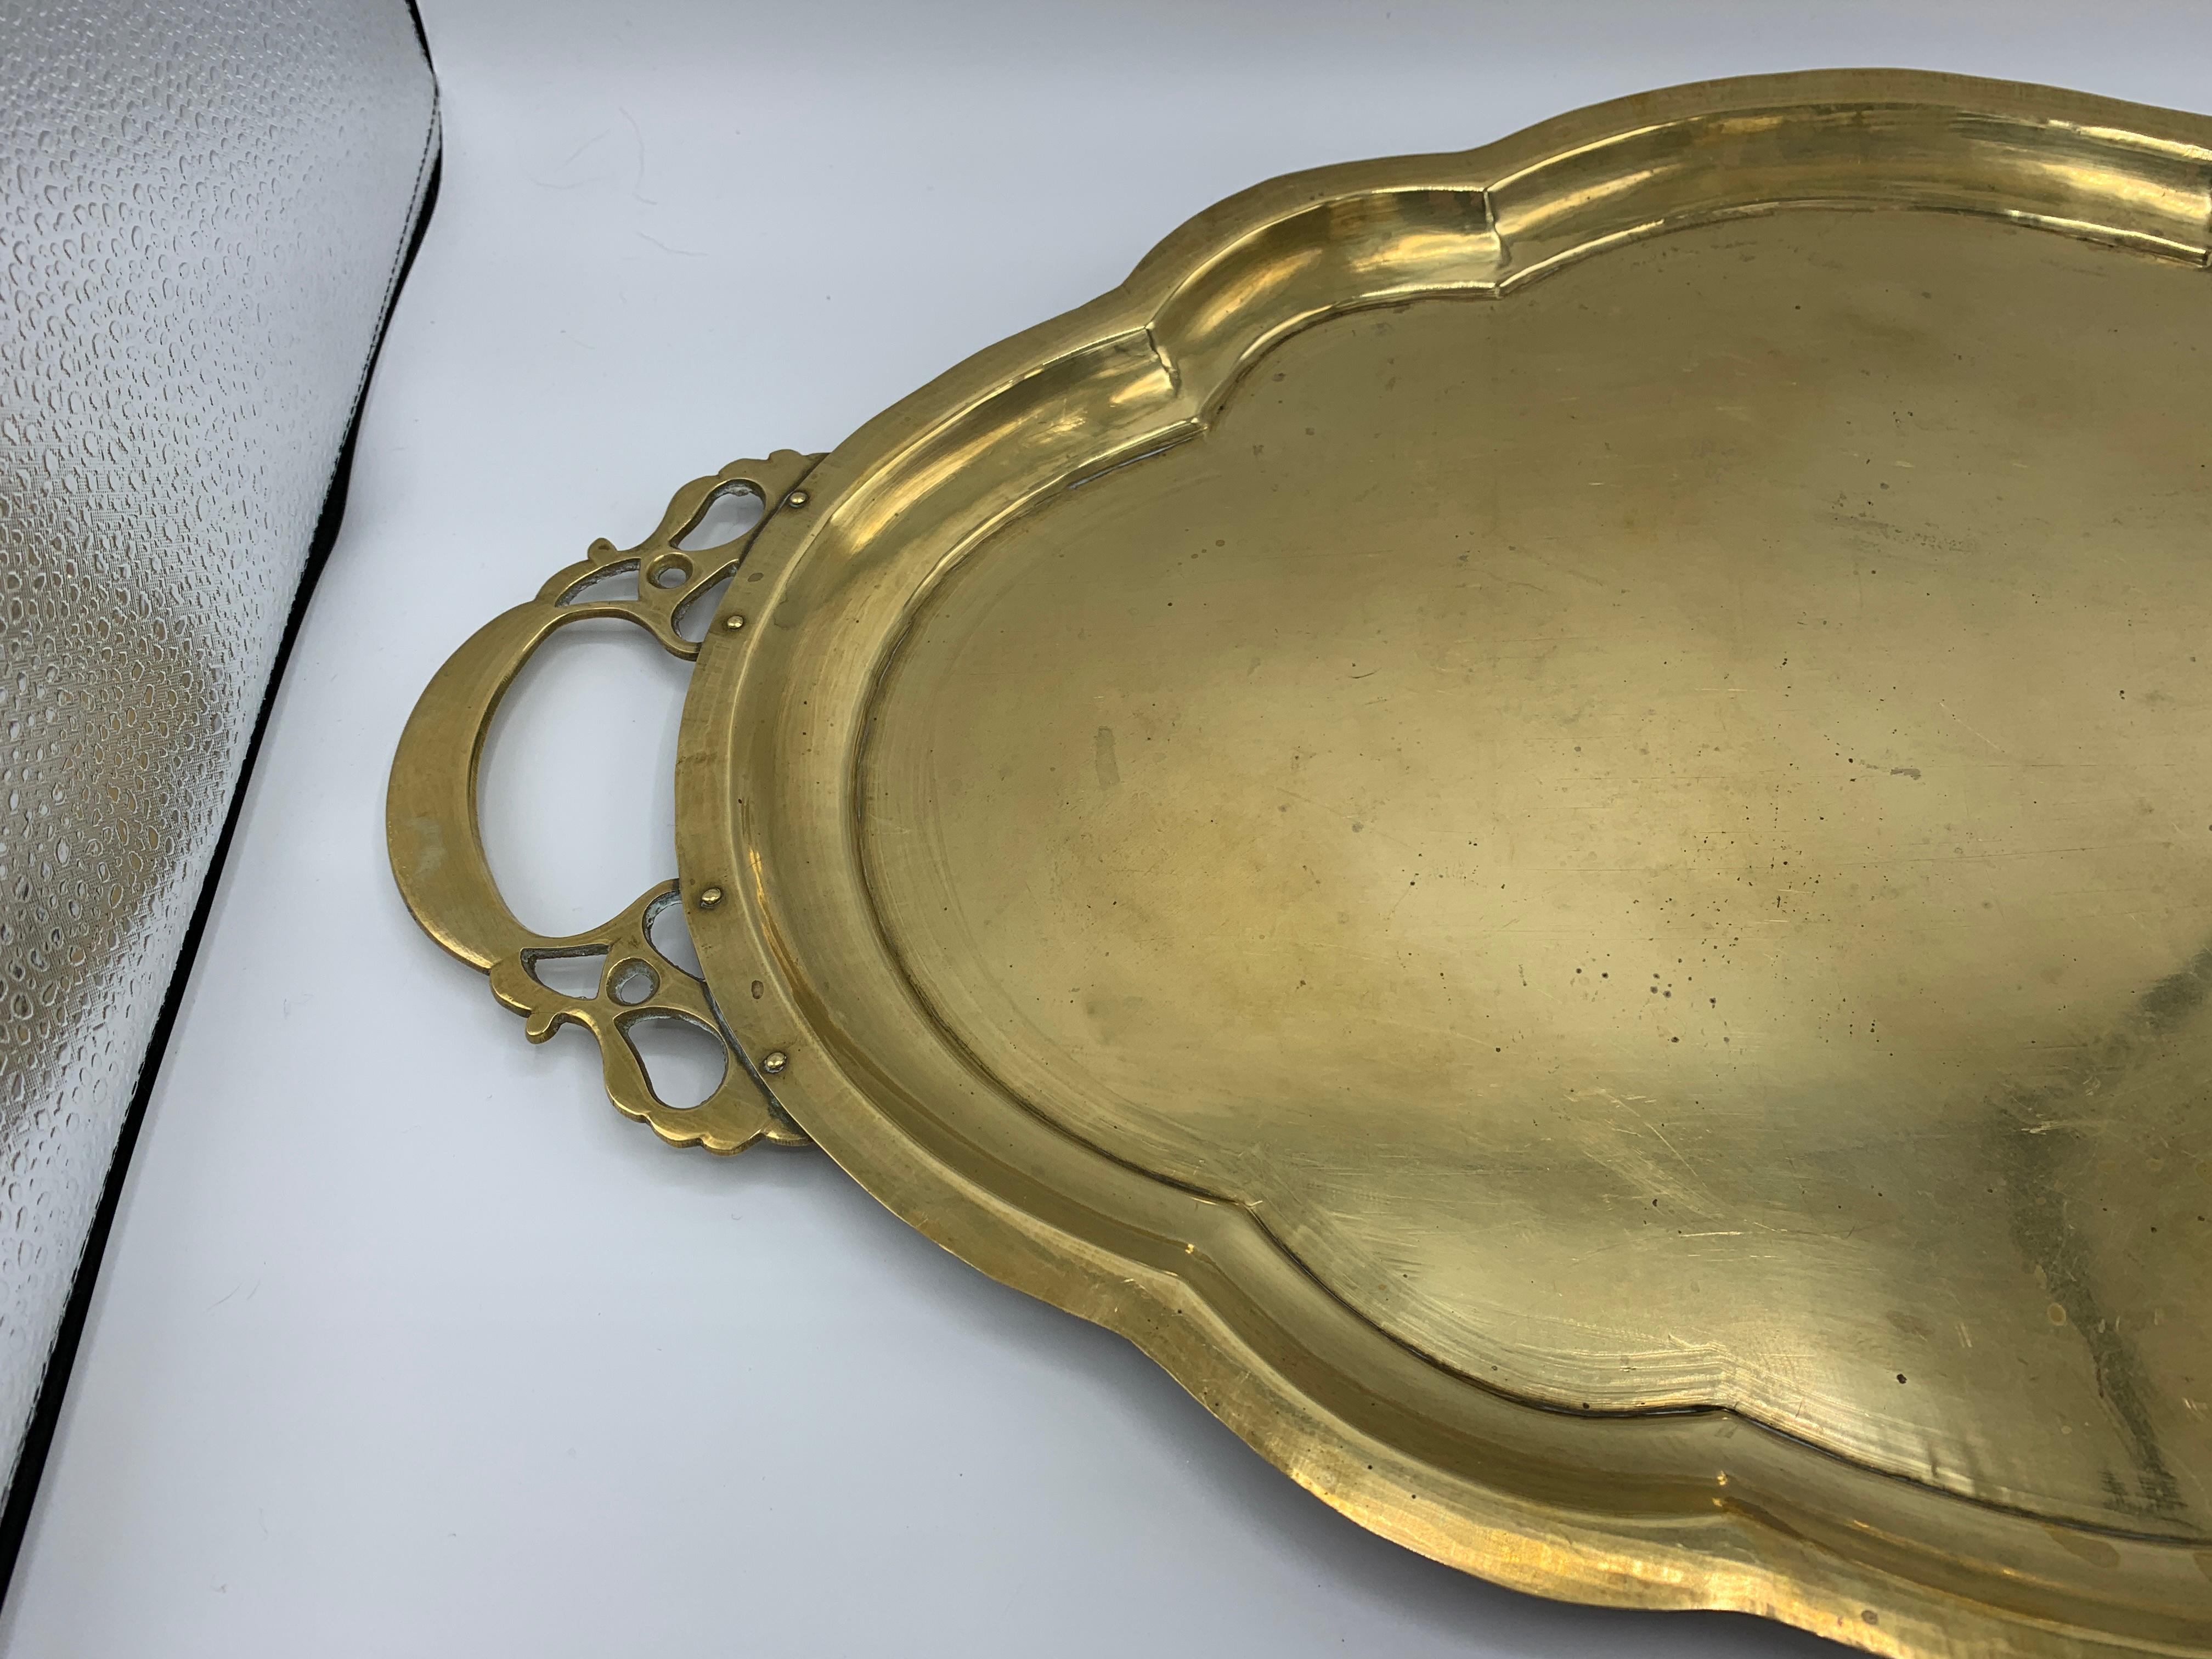 Offered is a gorgeous, 1970s brass tray with scalloped edging. Truly, a fabulous piece with its simple and elegant design. Heavy, weighing 3lbs.